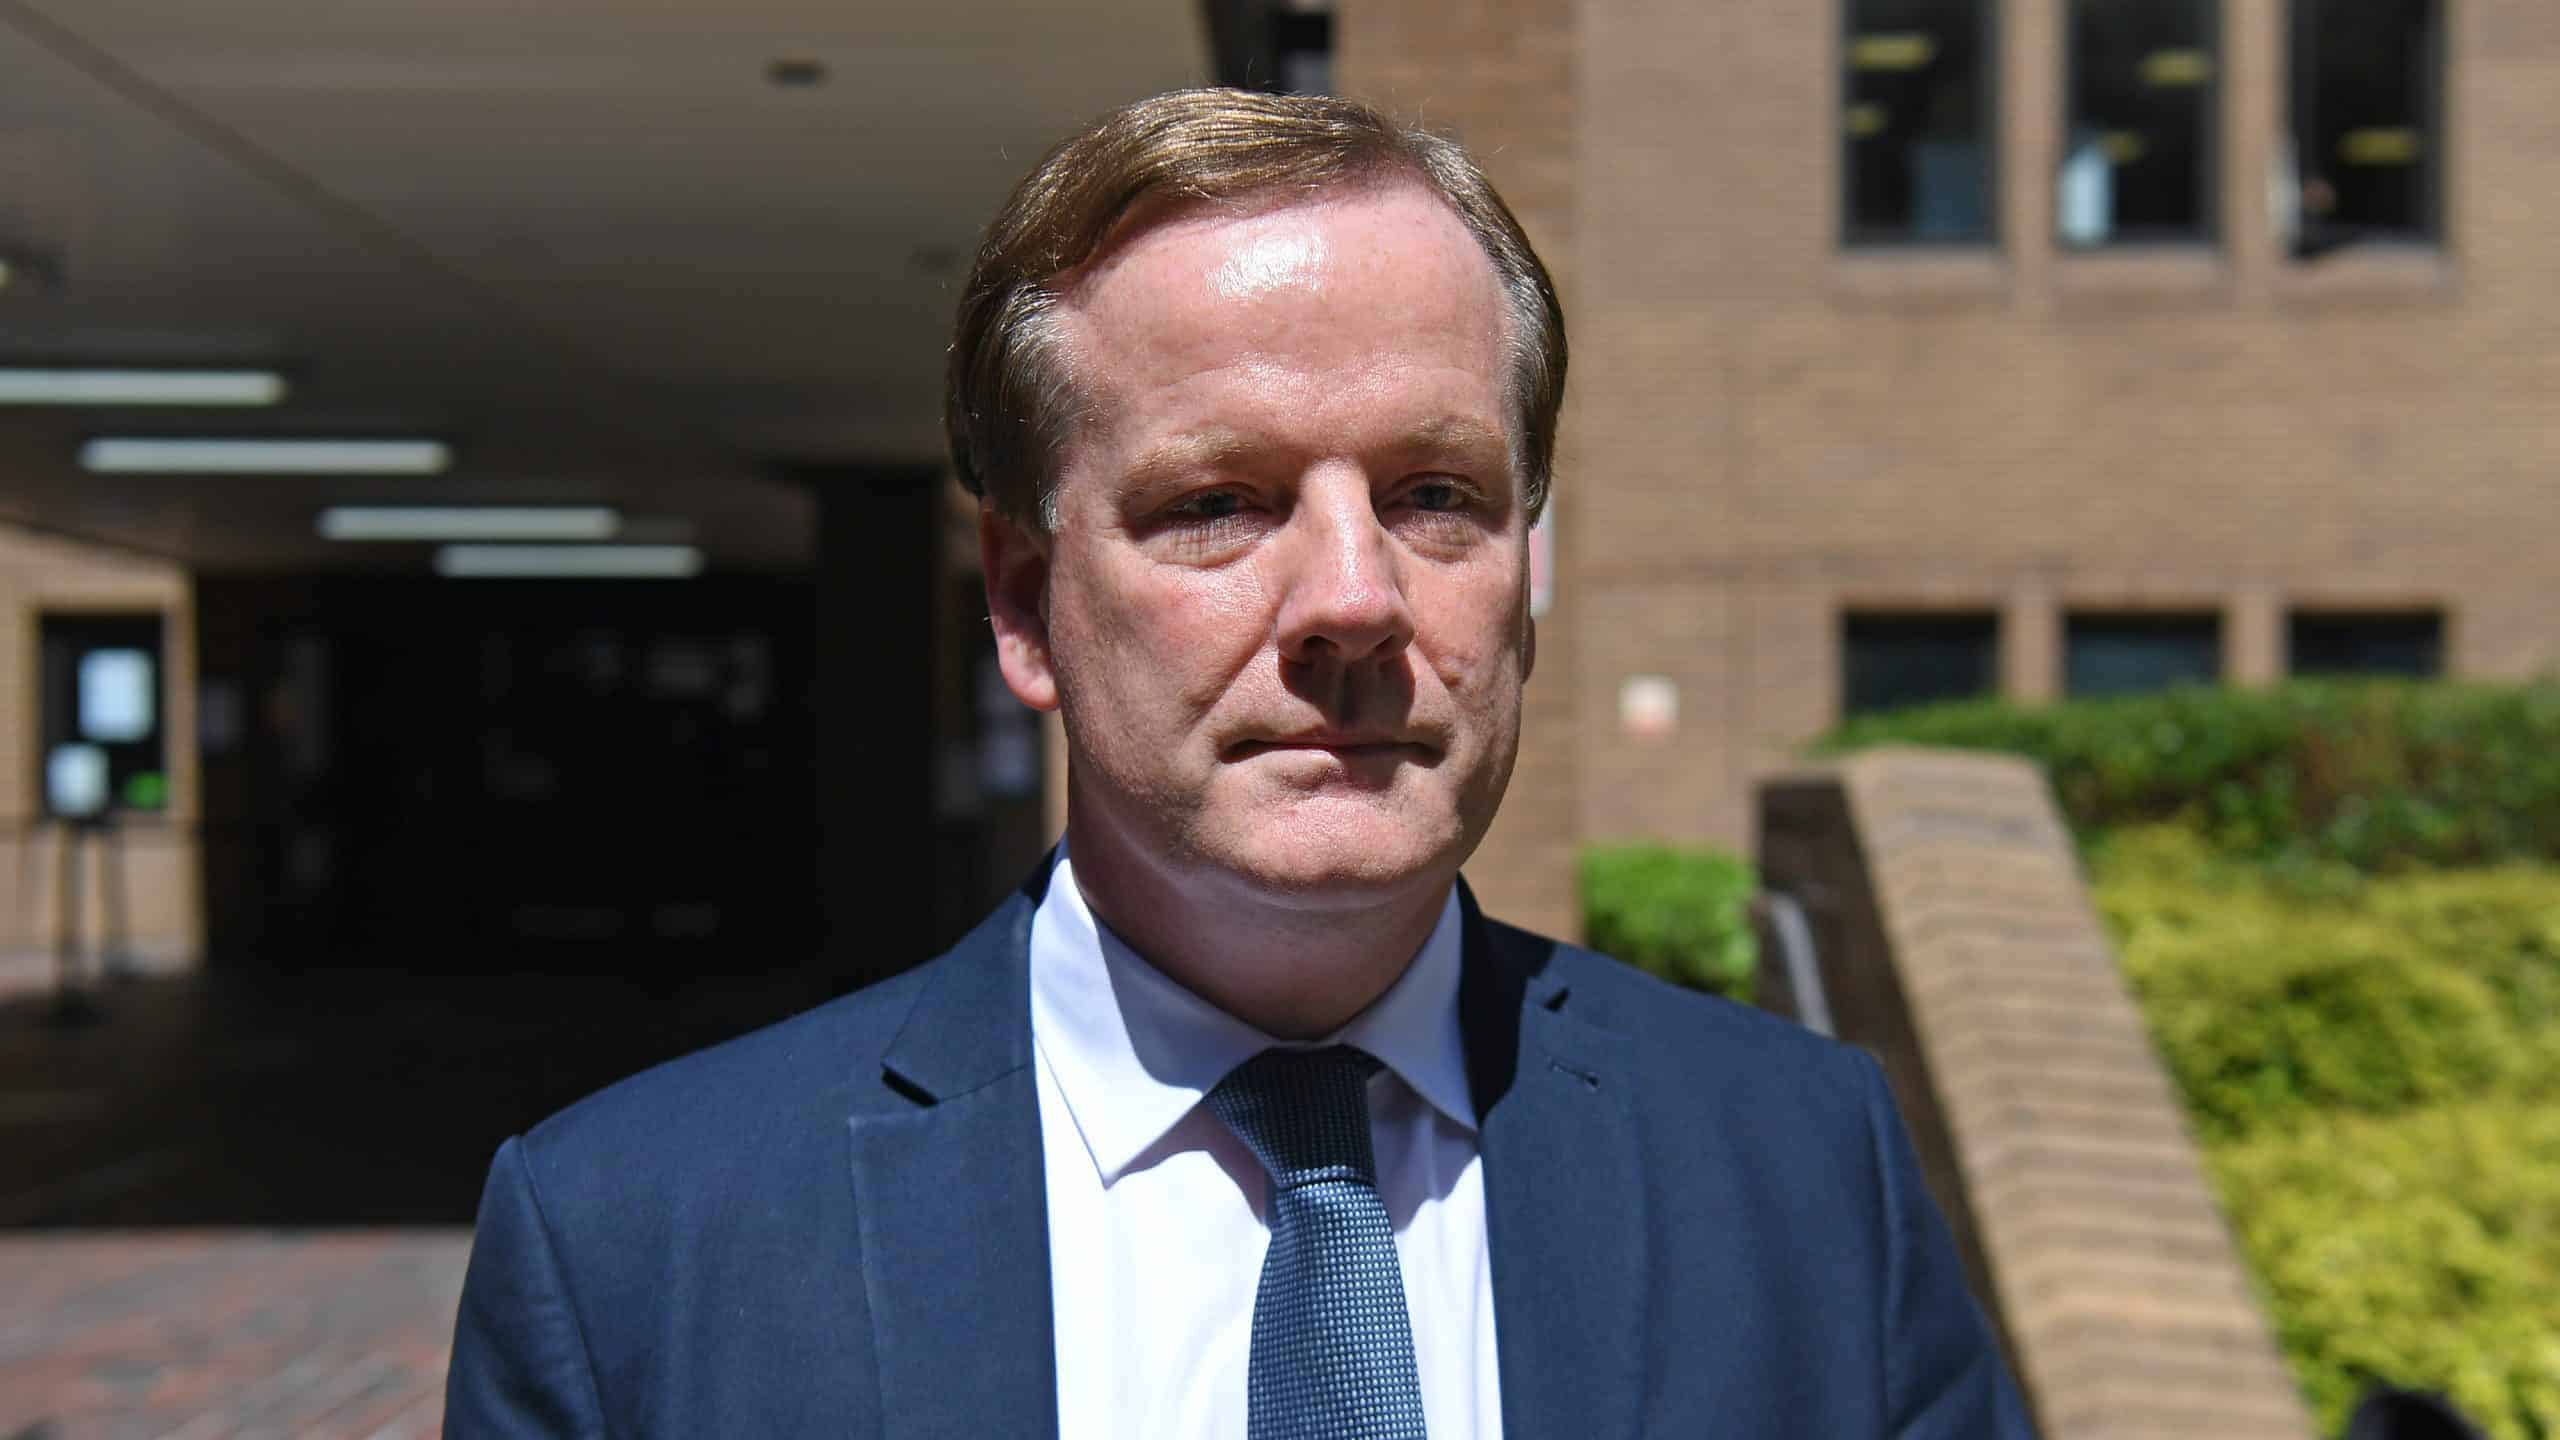 “Sexual predator” MP Charlie Elphicke jailed for two years